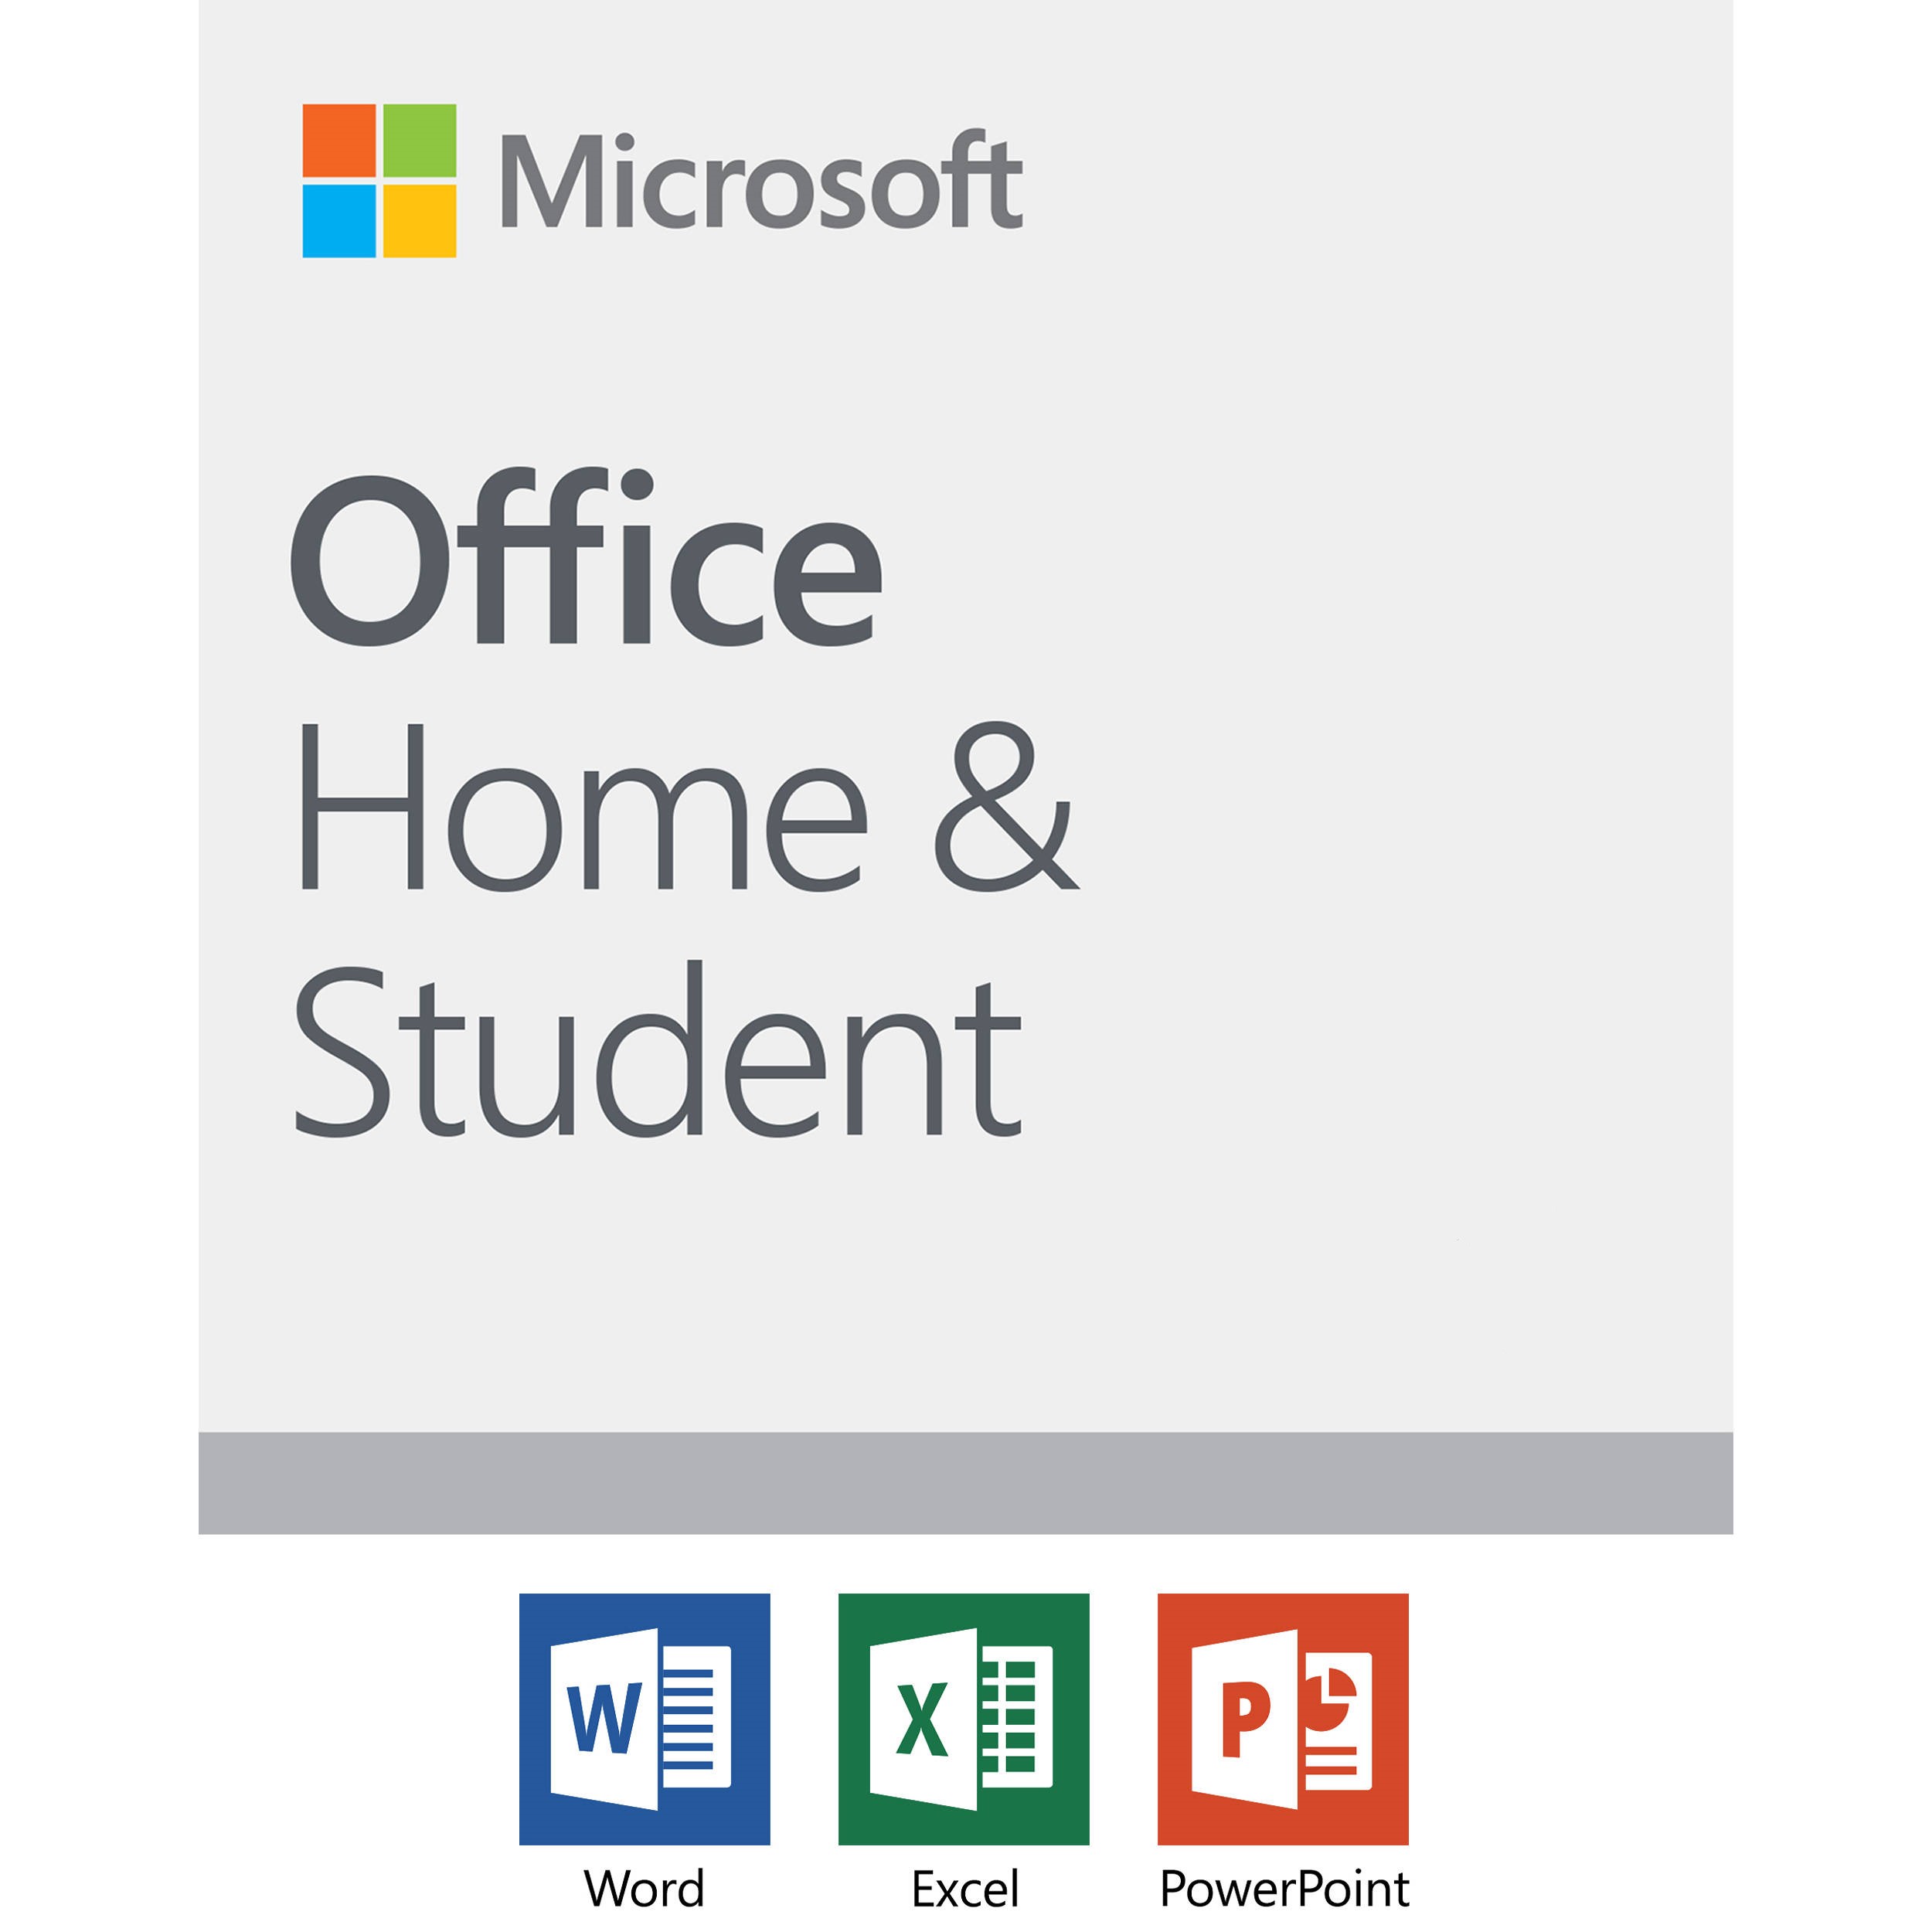 Home and business 2019. Office 2021 Home and student. Office 2019 Home and student. Office 2021 Home and Business. Microsoft Office для дома и учебы 2019.